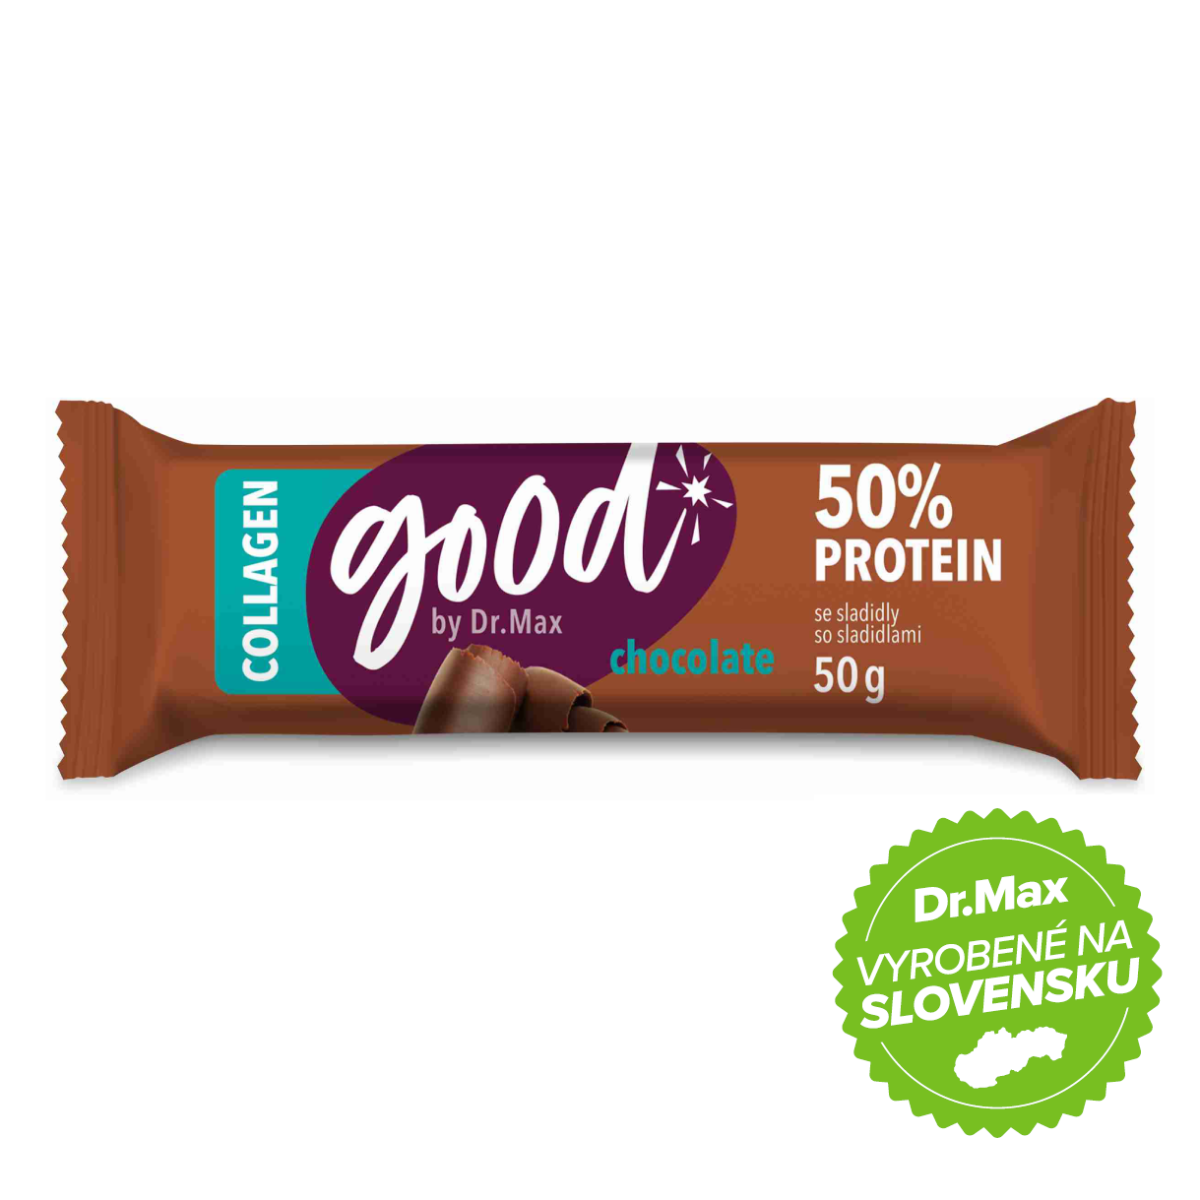 Good by Dr. Max Protein Bar 50 percent Chocolate 50 g